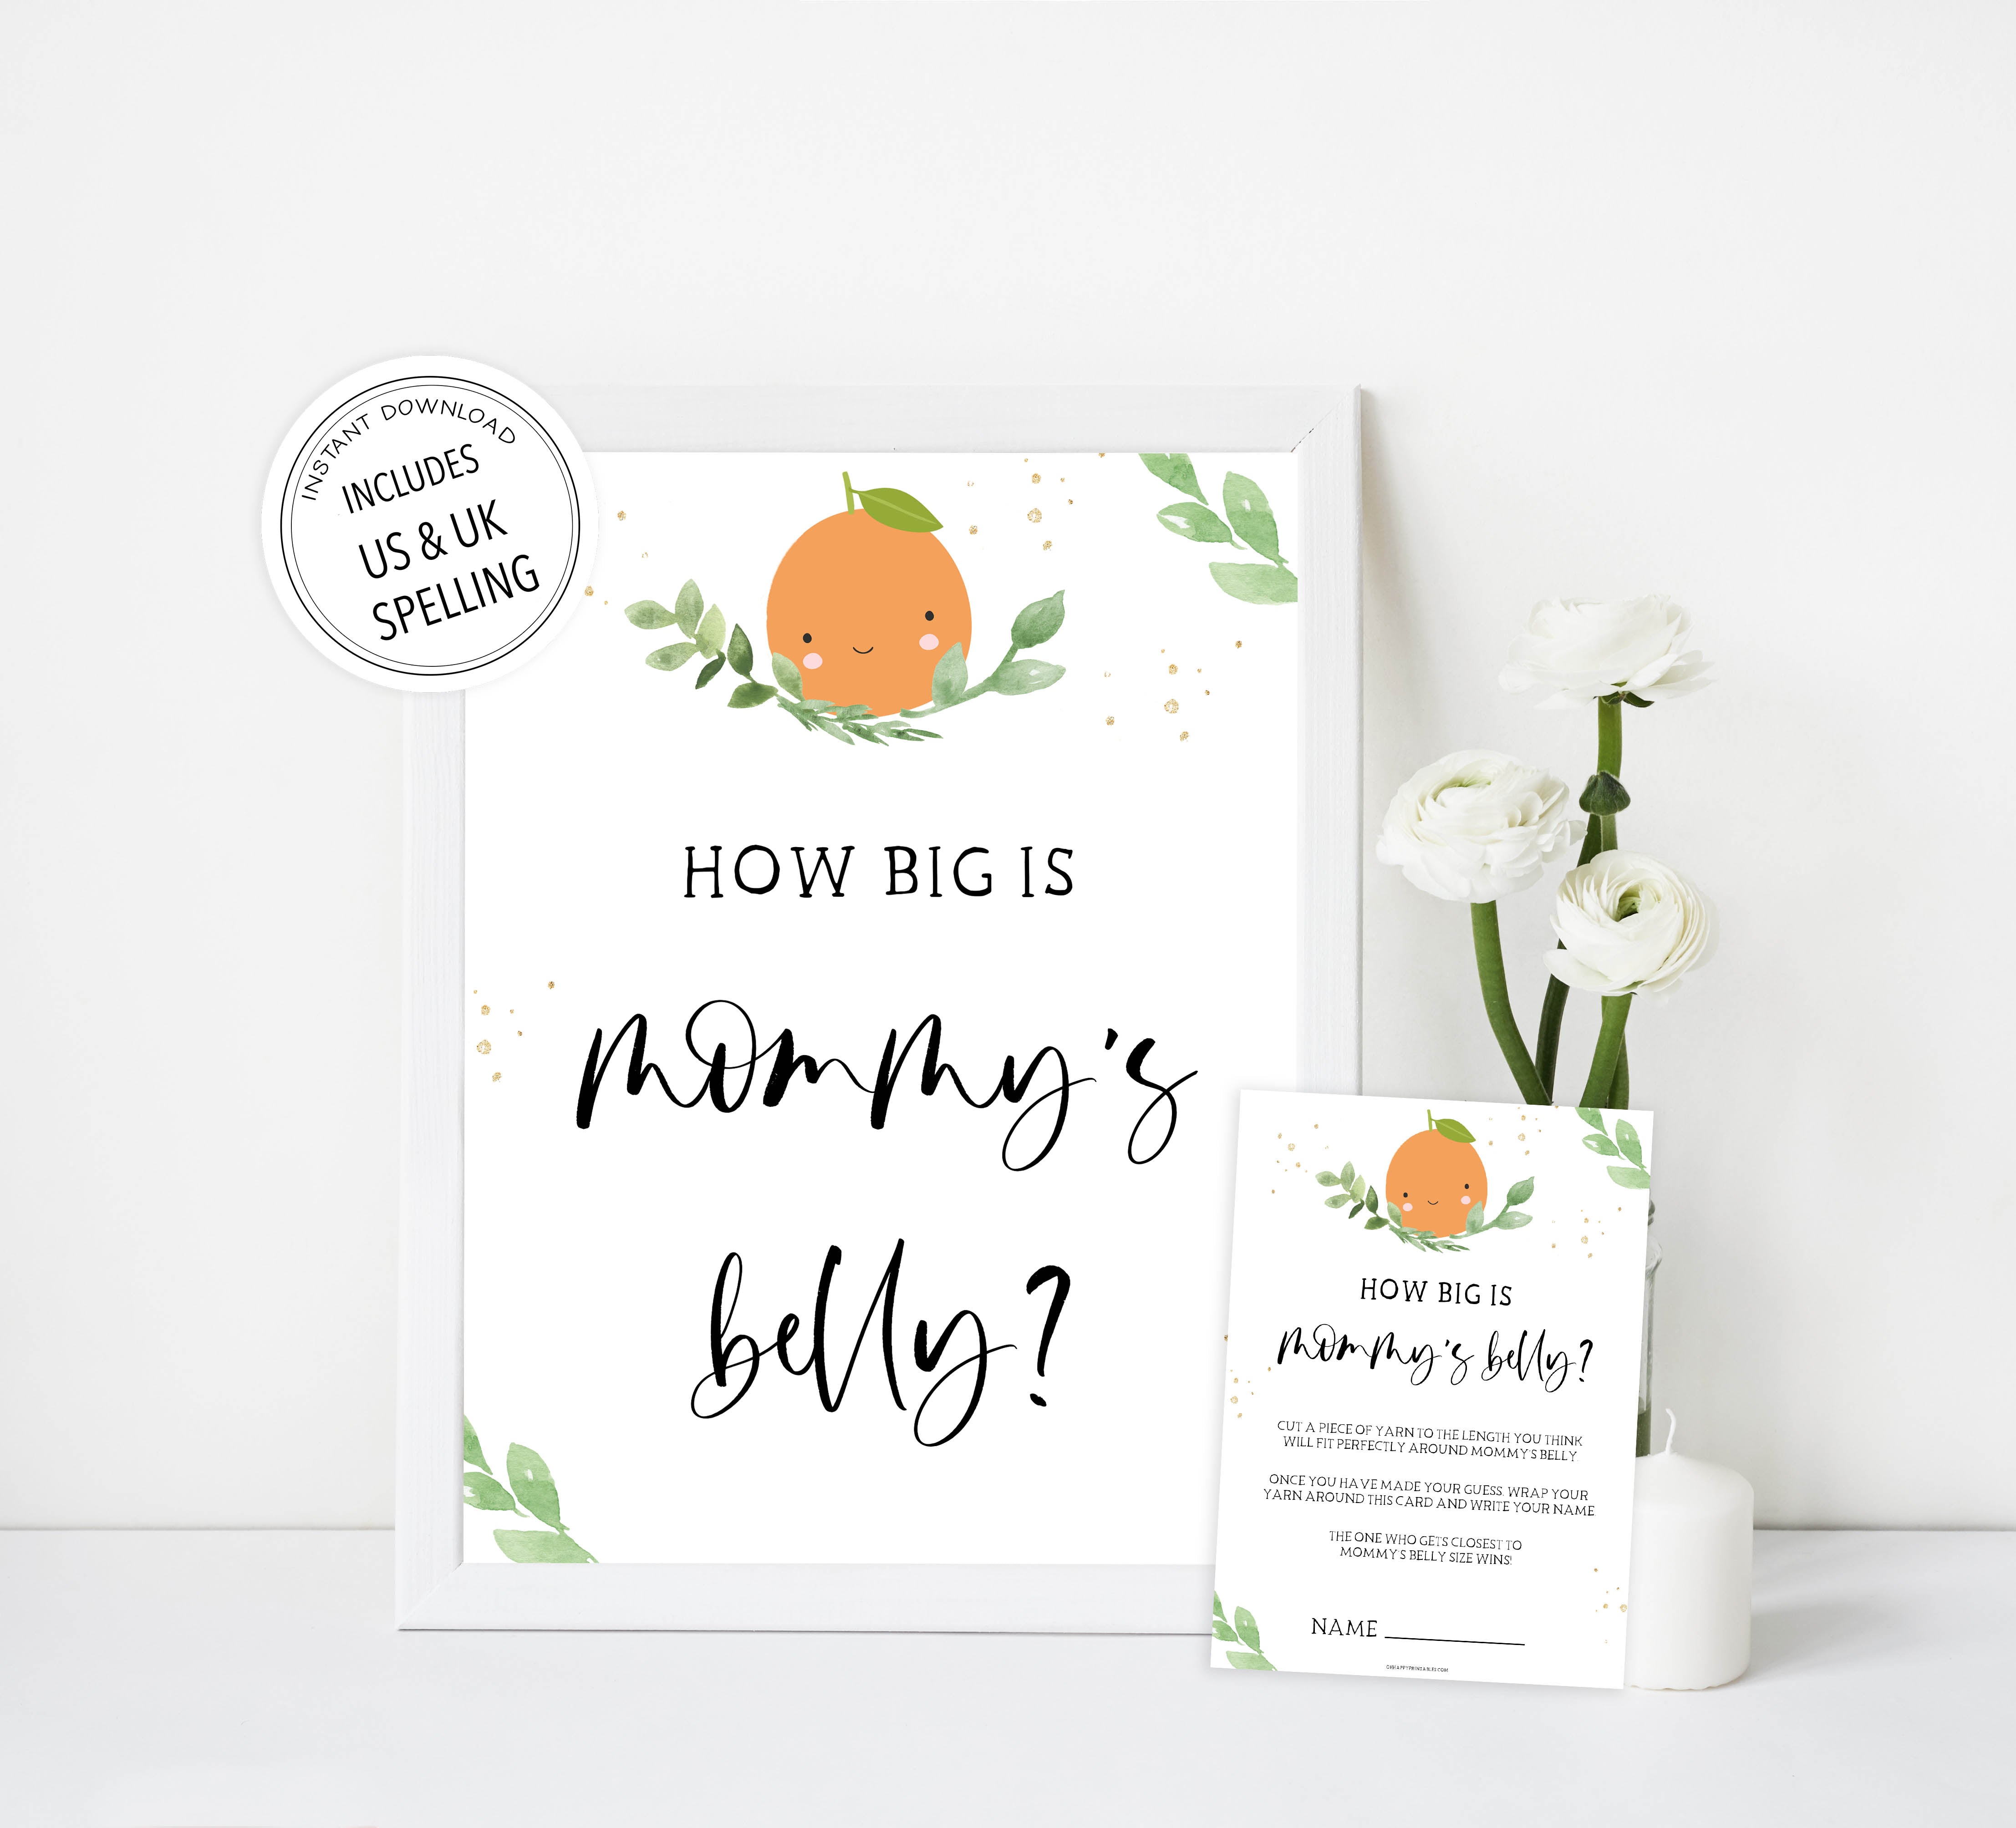 how big is mommys belly game, Printable baby shower games, little cutie baby games, baby shower games, fun baby shower ideas, top baby shower ideas, little cutie baby shower, baby shower games, fun little cutie baby shower ideas